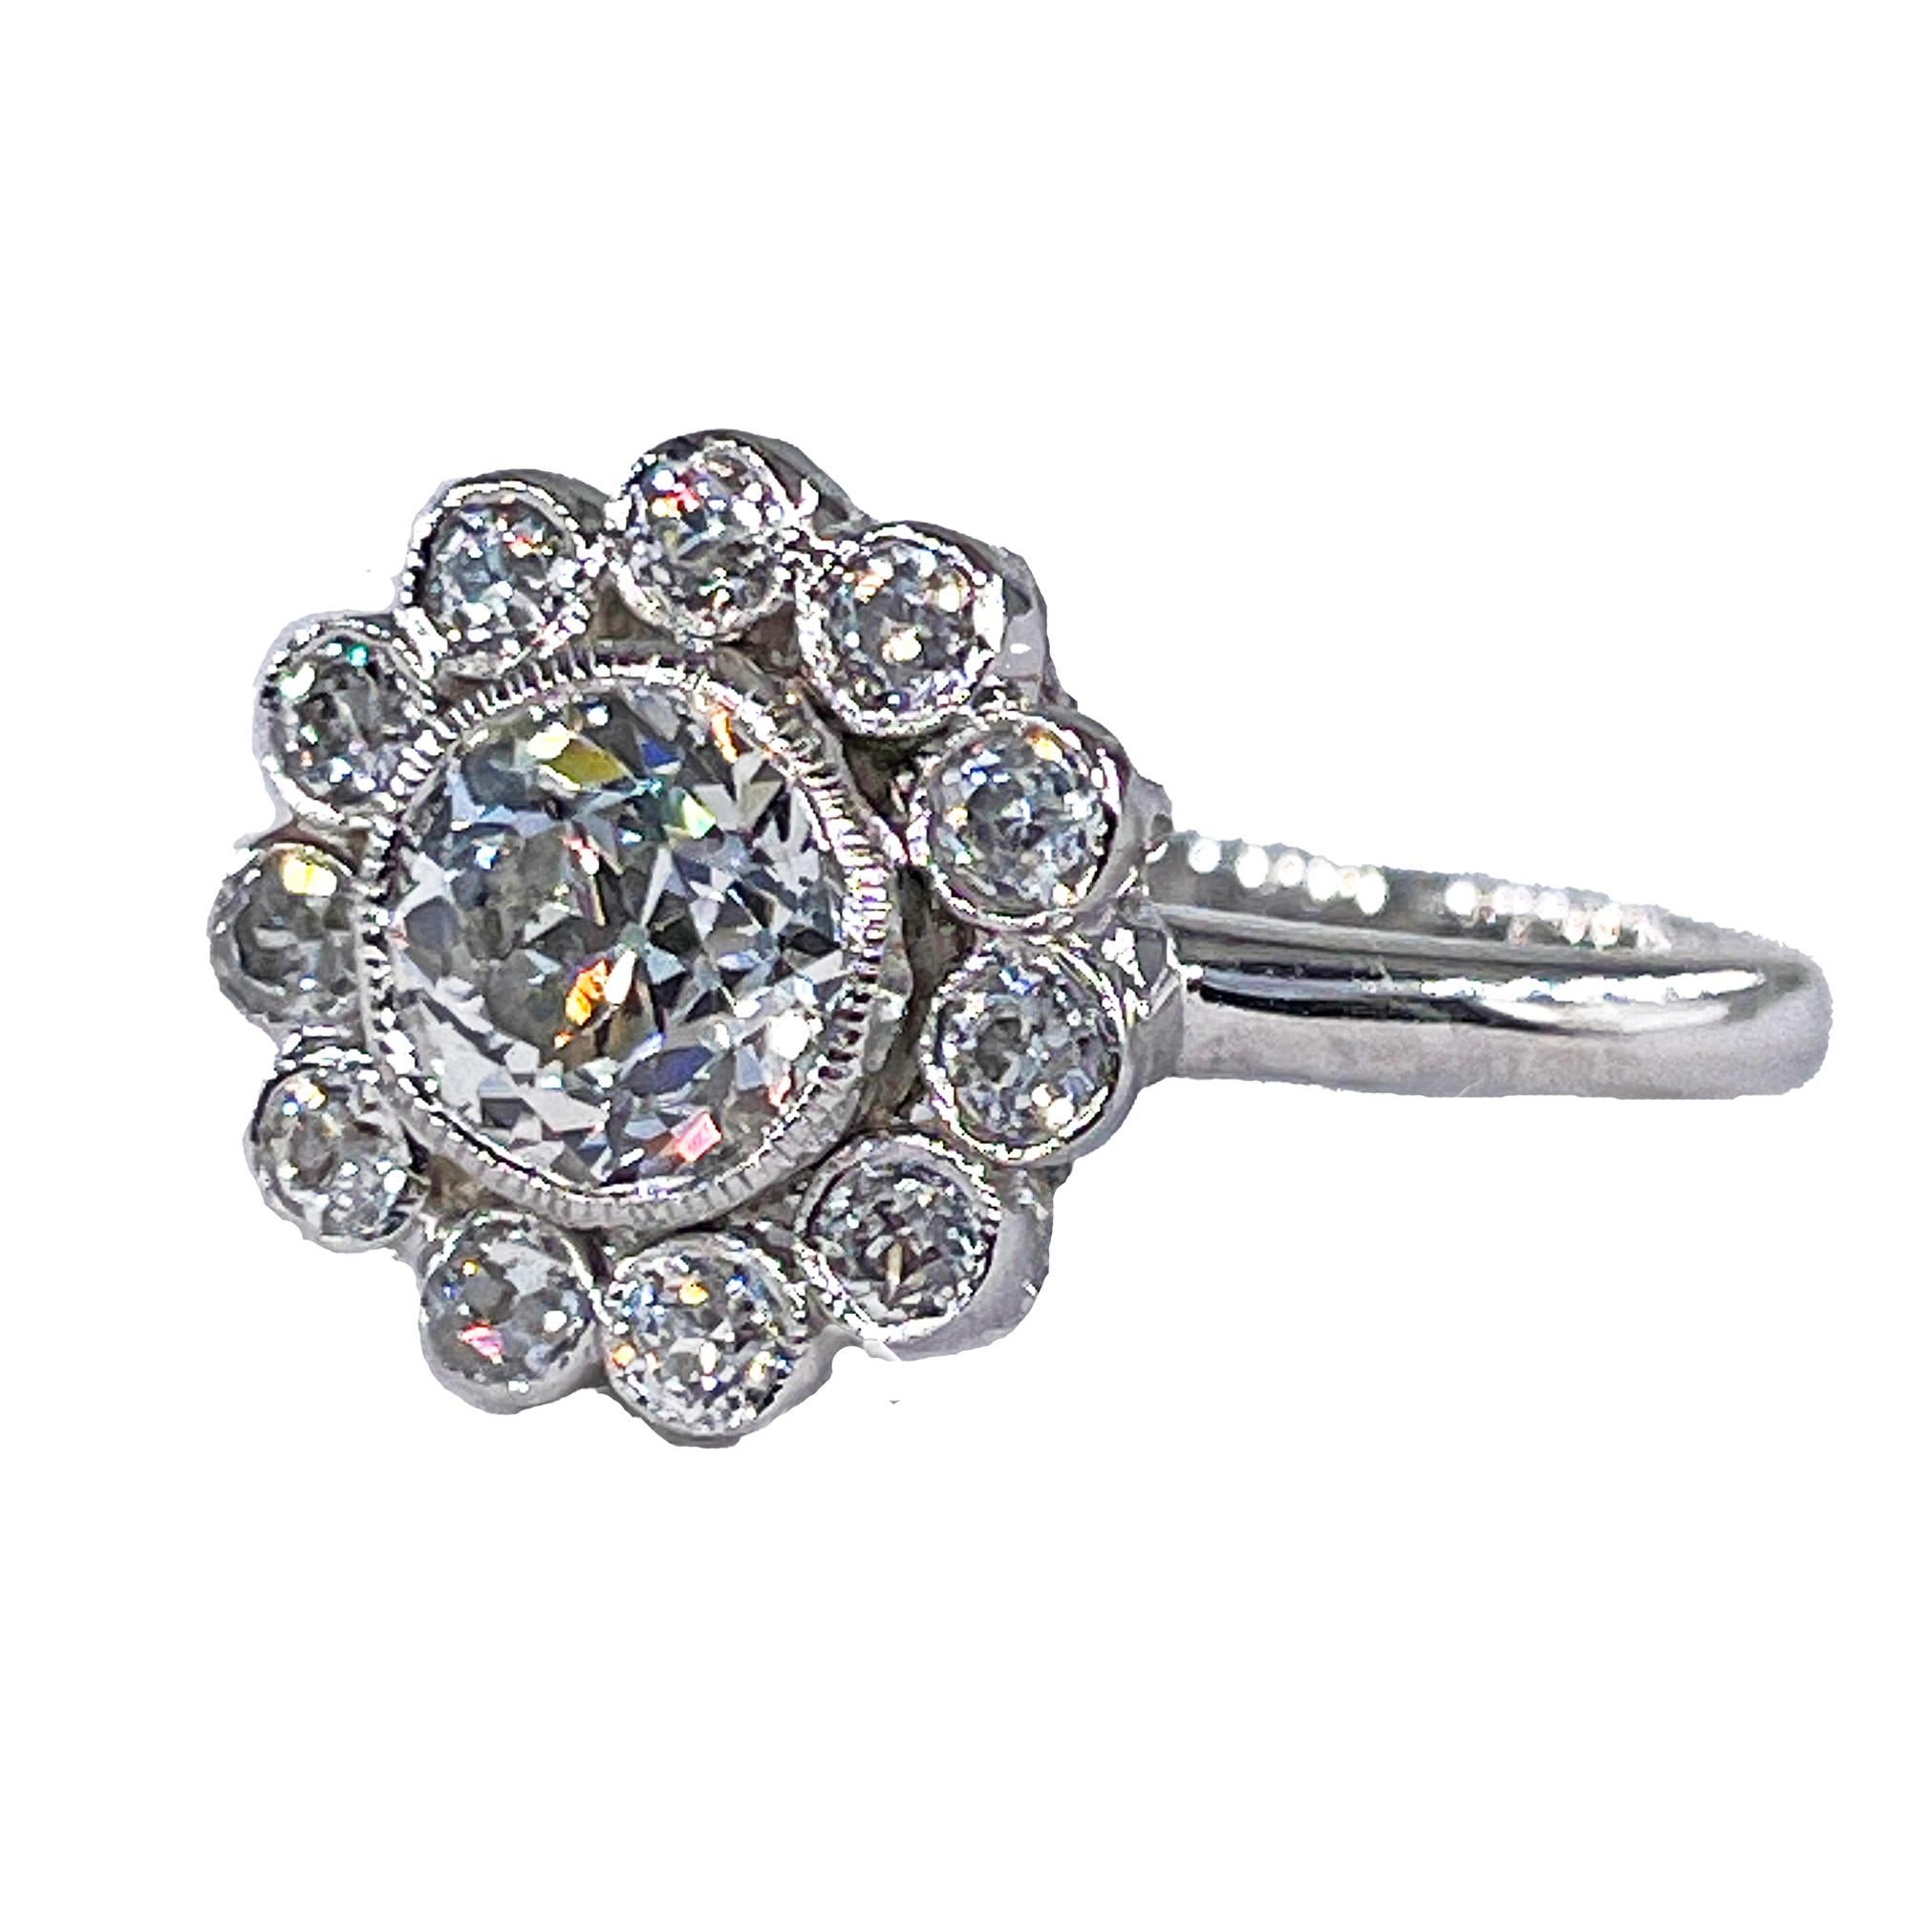 Vintage GIA Colorless 2.06ctw Old European Diamond Cocktail Flower Cluster Platinum Ring.
This breathtakingly shimmering classic Edwardian style flower-shaped cluster, composed of 12 bright-white old European-cut diamonds totaling approx. 2.05